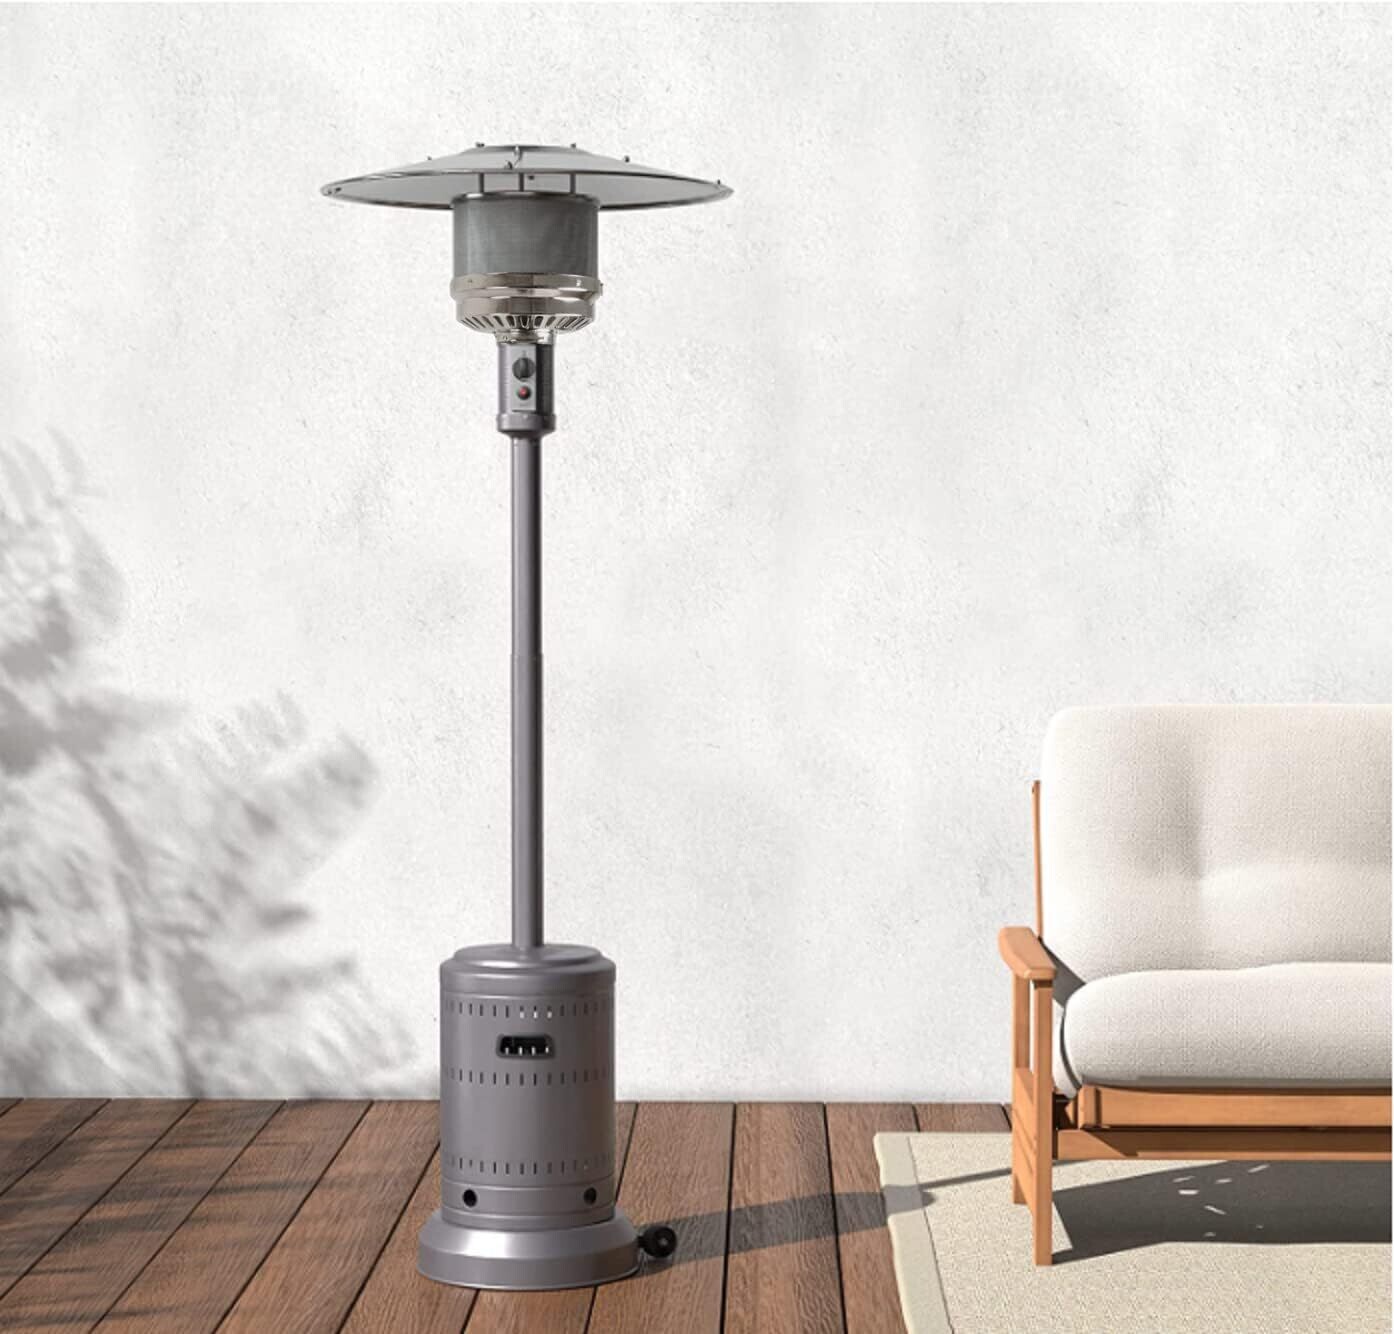 Commercial & Residential Outdoor Mushroom Patio Heater with Wheels, Propane 46,000 BTU